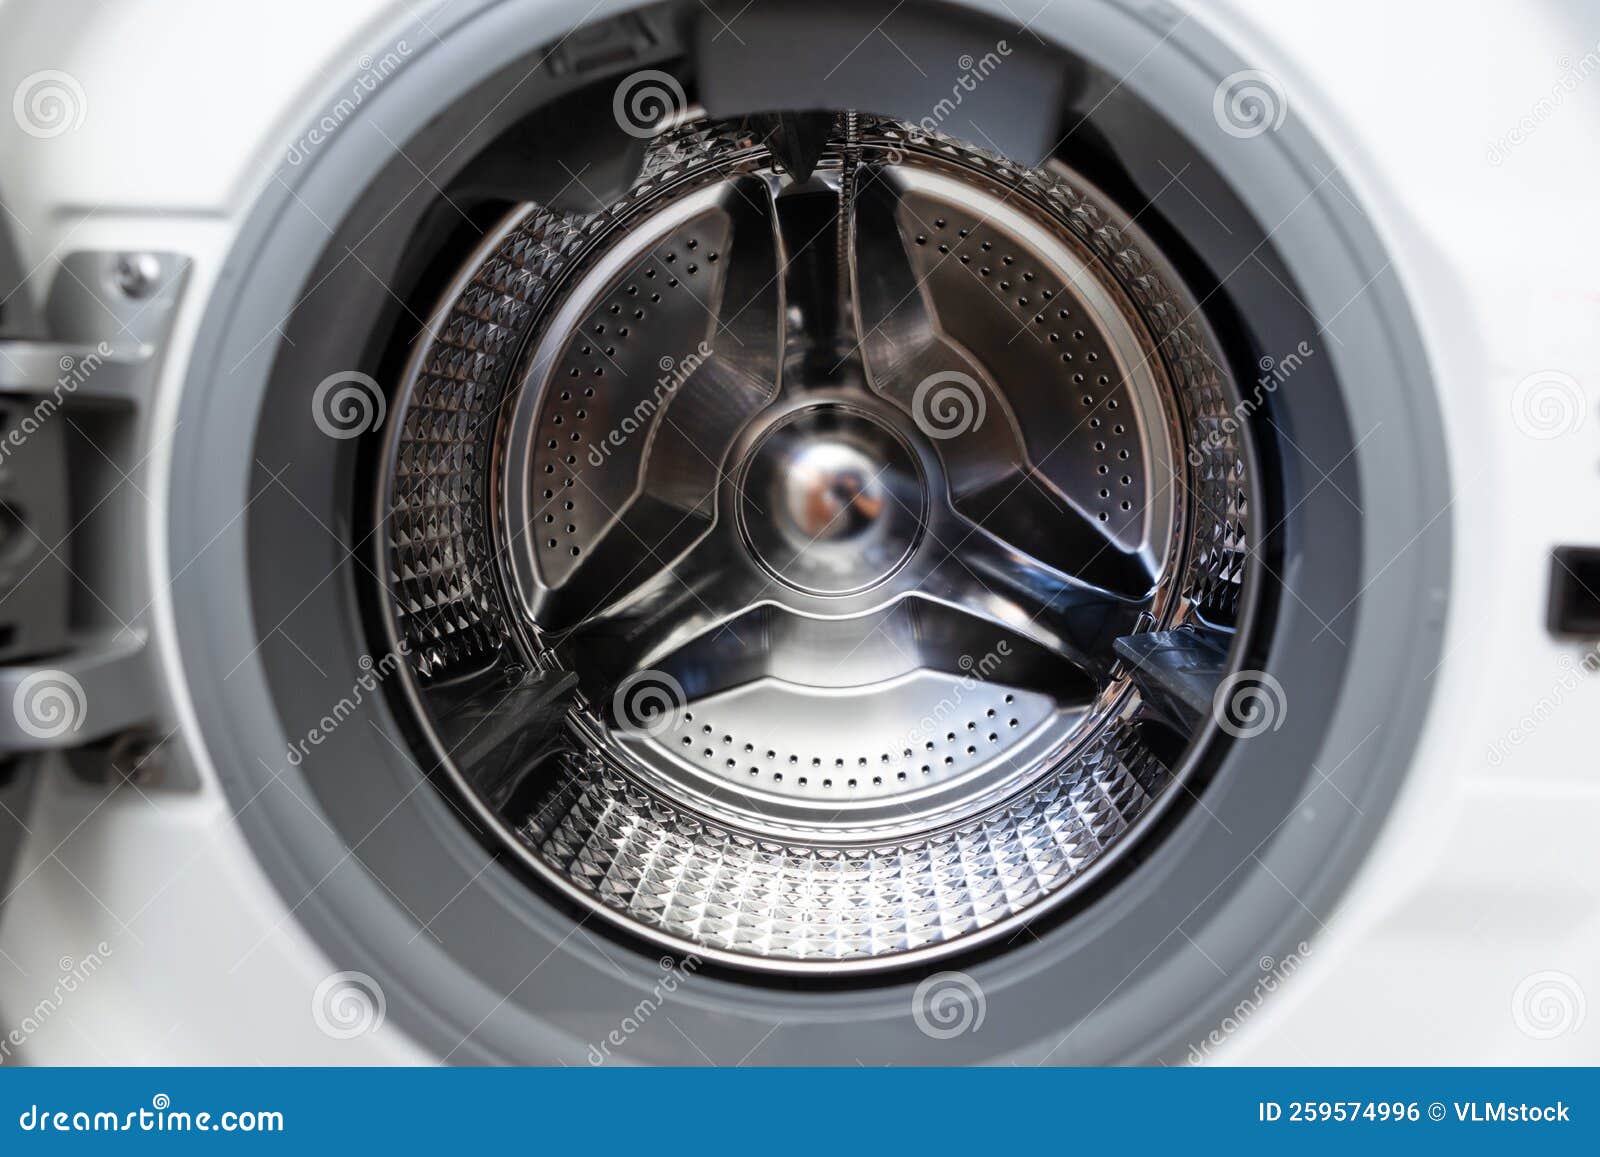 40,992 Metal Washer Images, Stock Photos, 3D objects, & Vectors